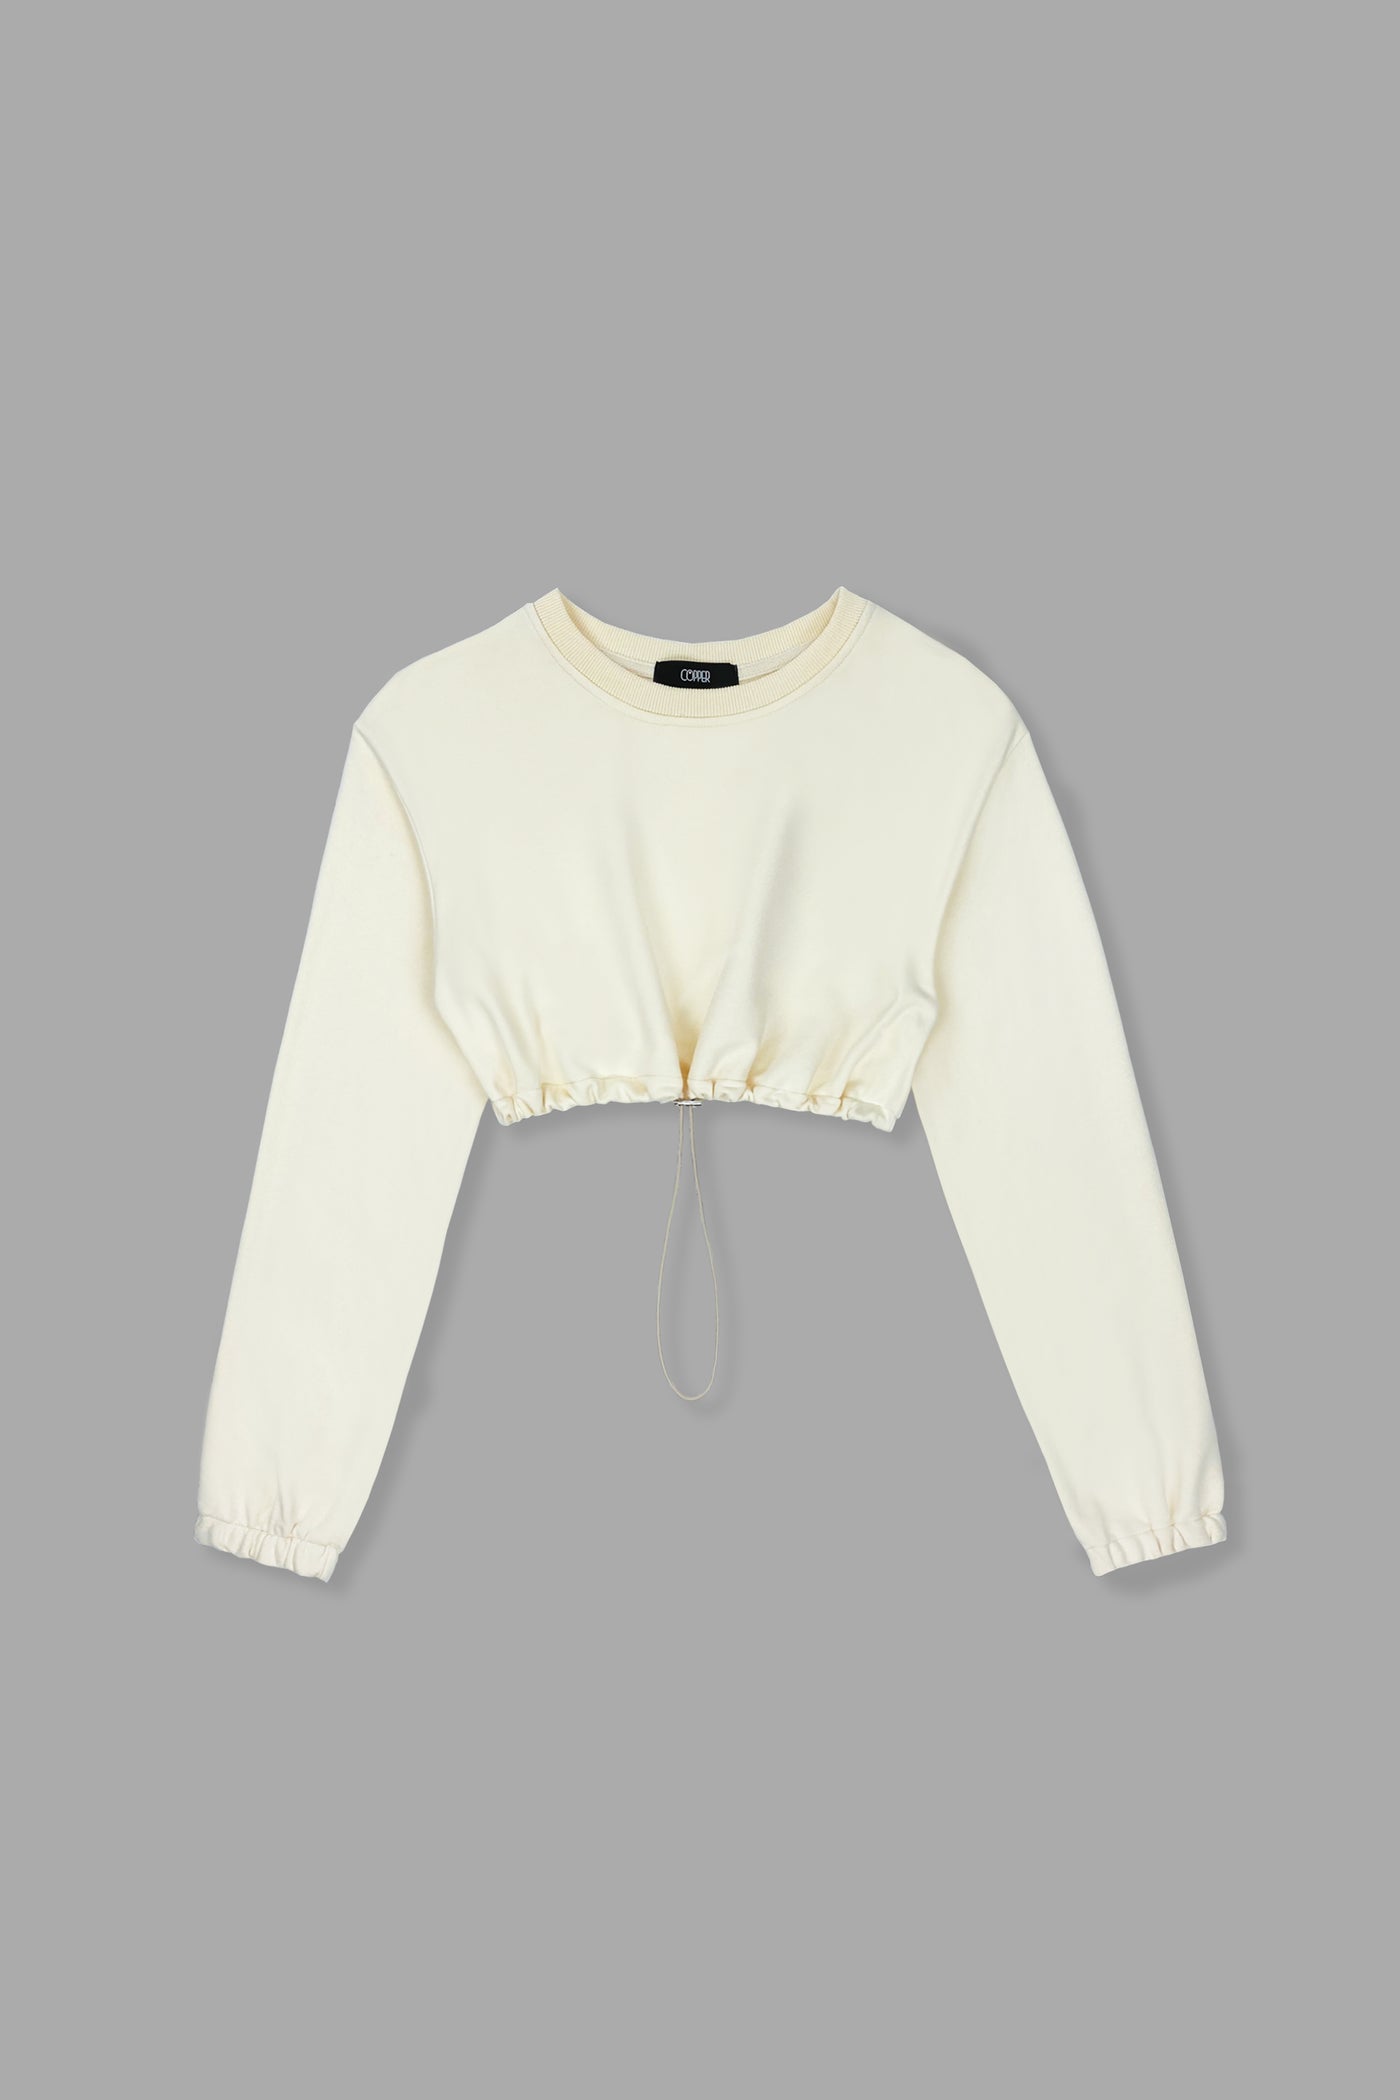 [EVERYDAY] Daily Basis Draw Cord Cropped Sweatshirt - Oat